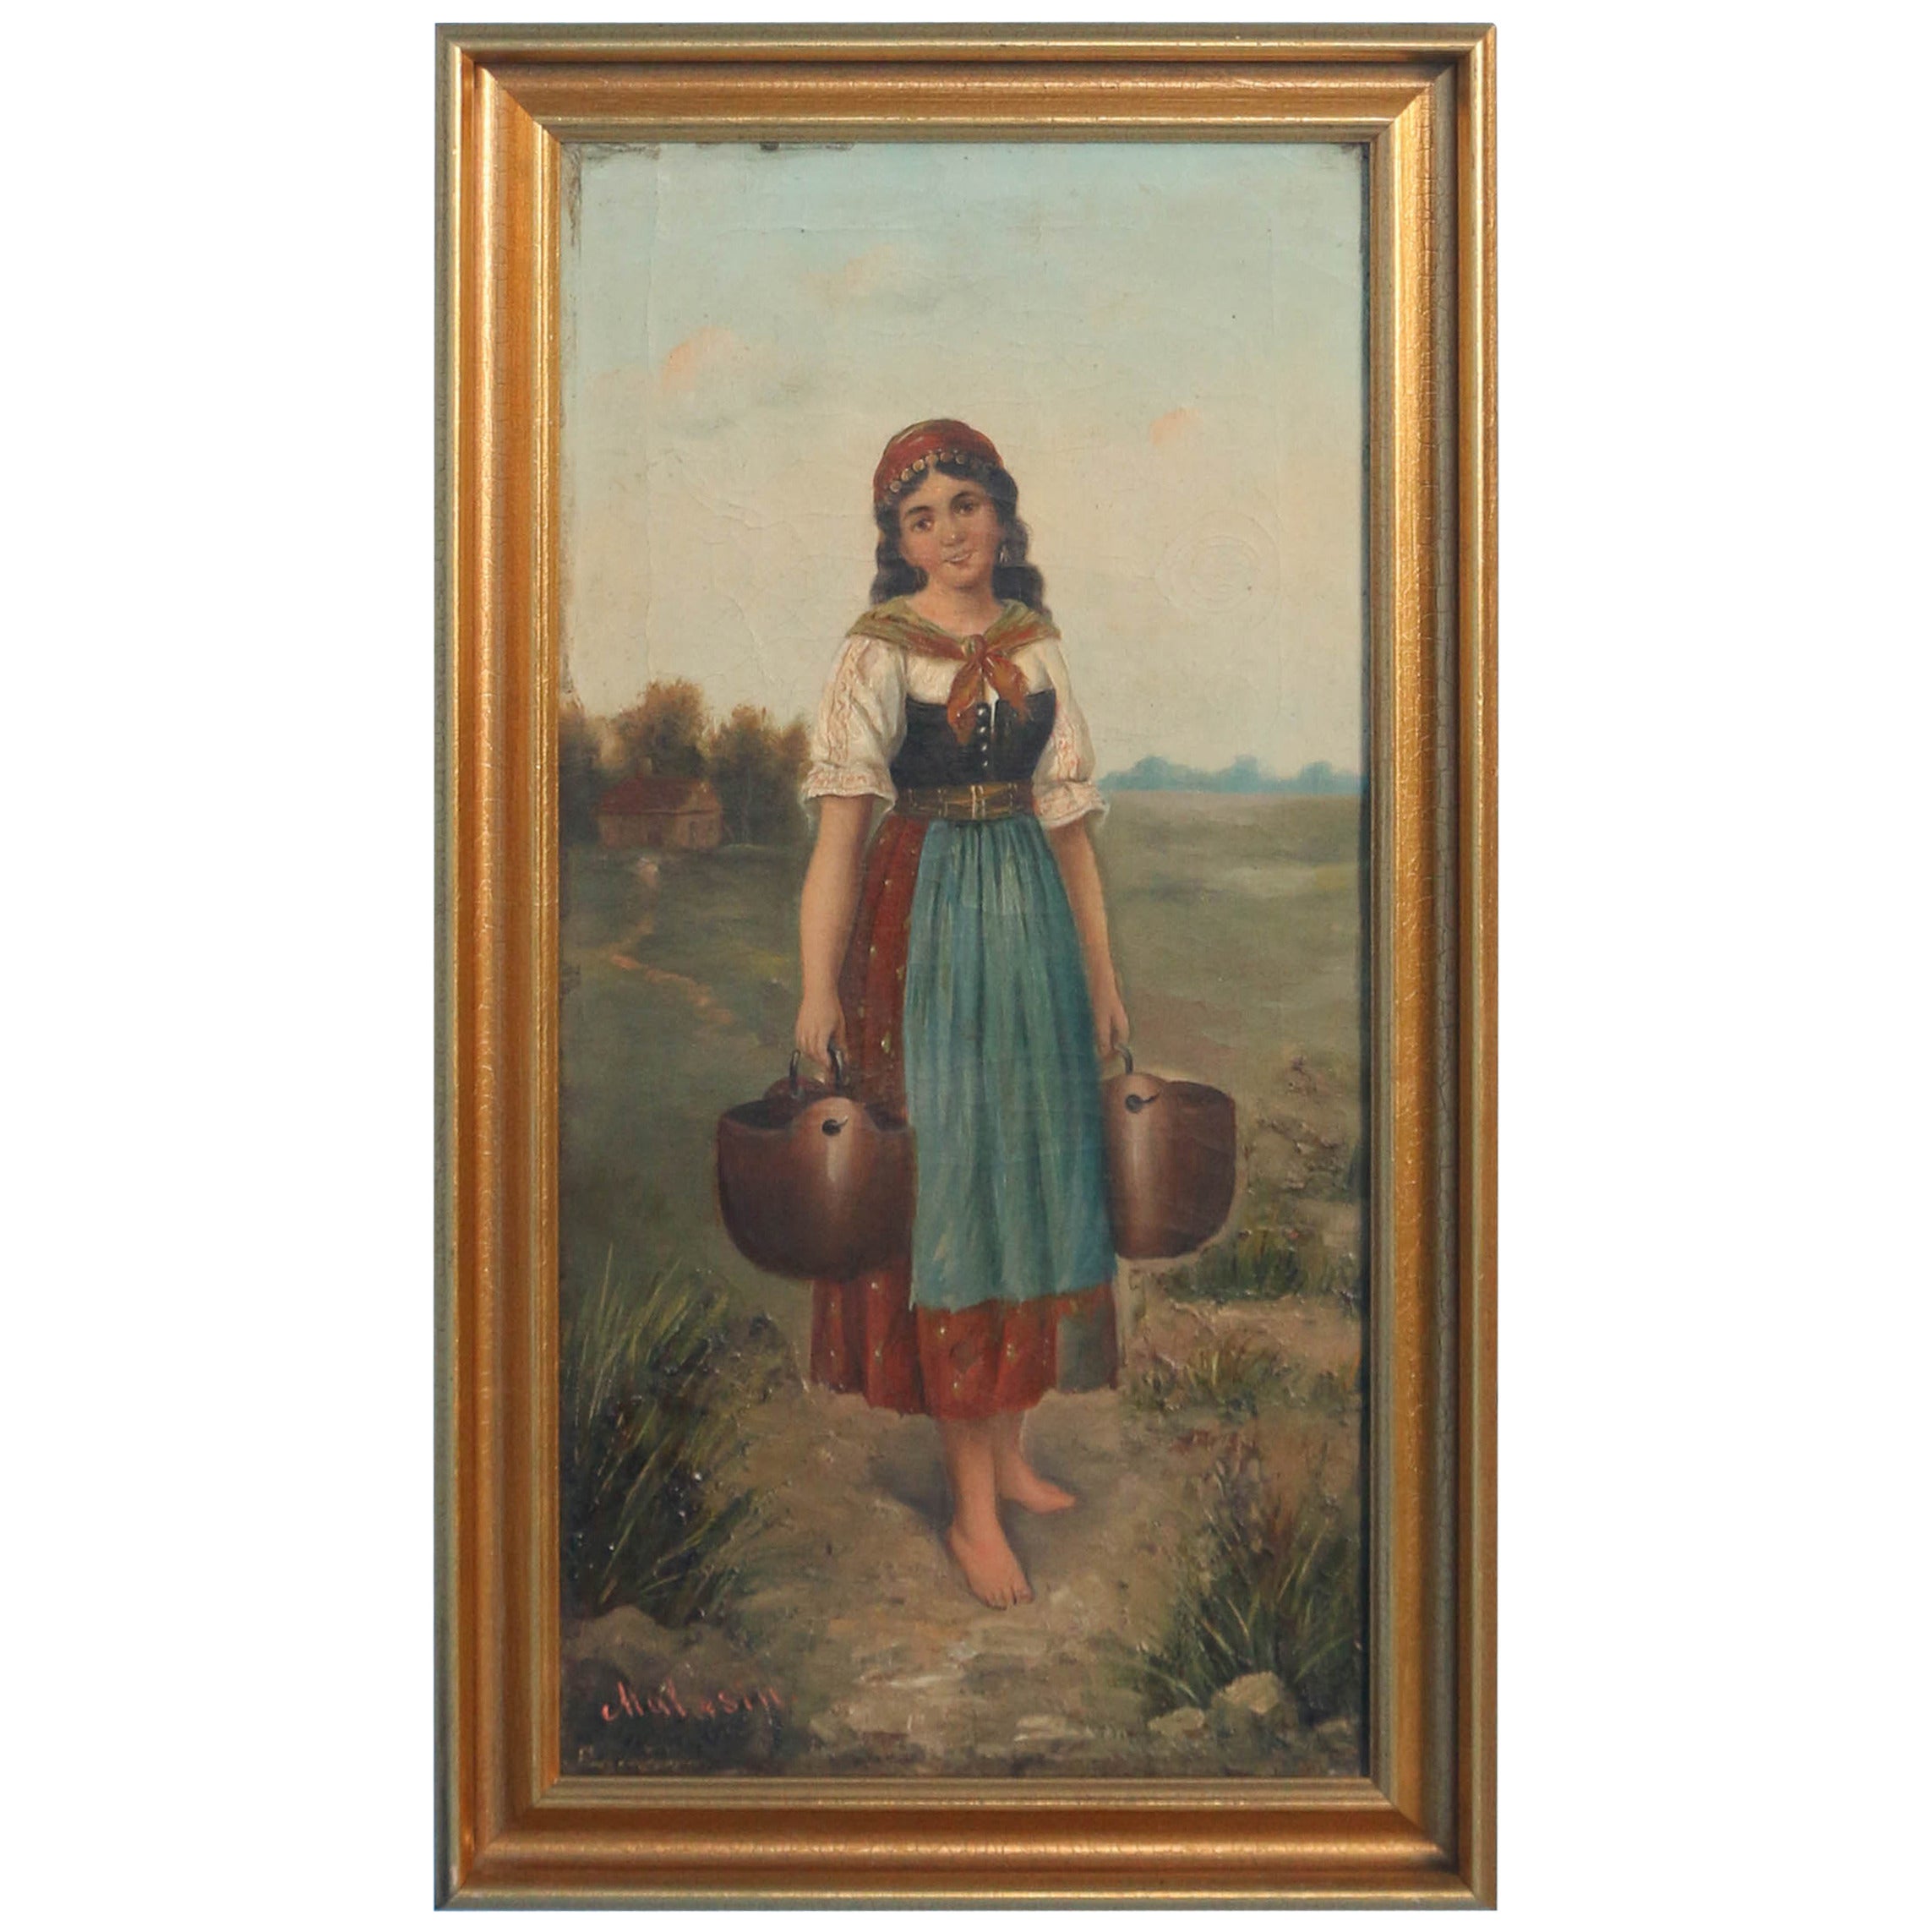 Original Oil on Canvas Painting, Young Woman with Pails, Signed "Malasin"